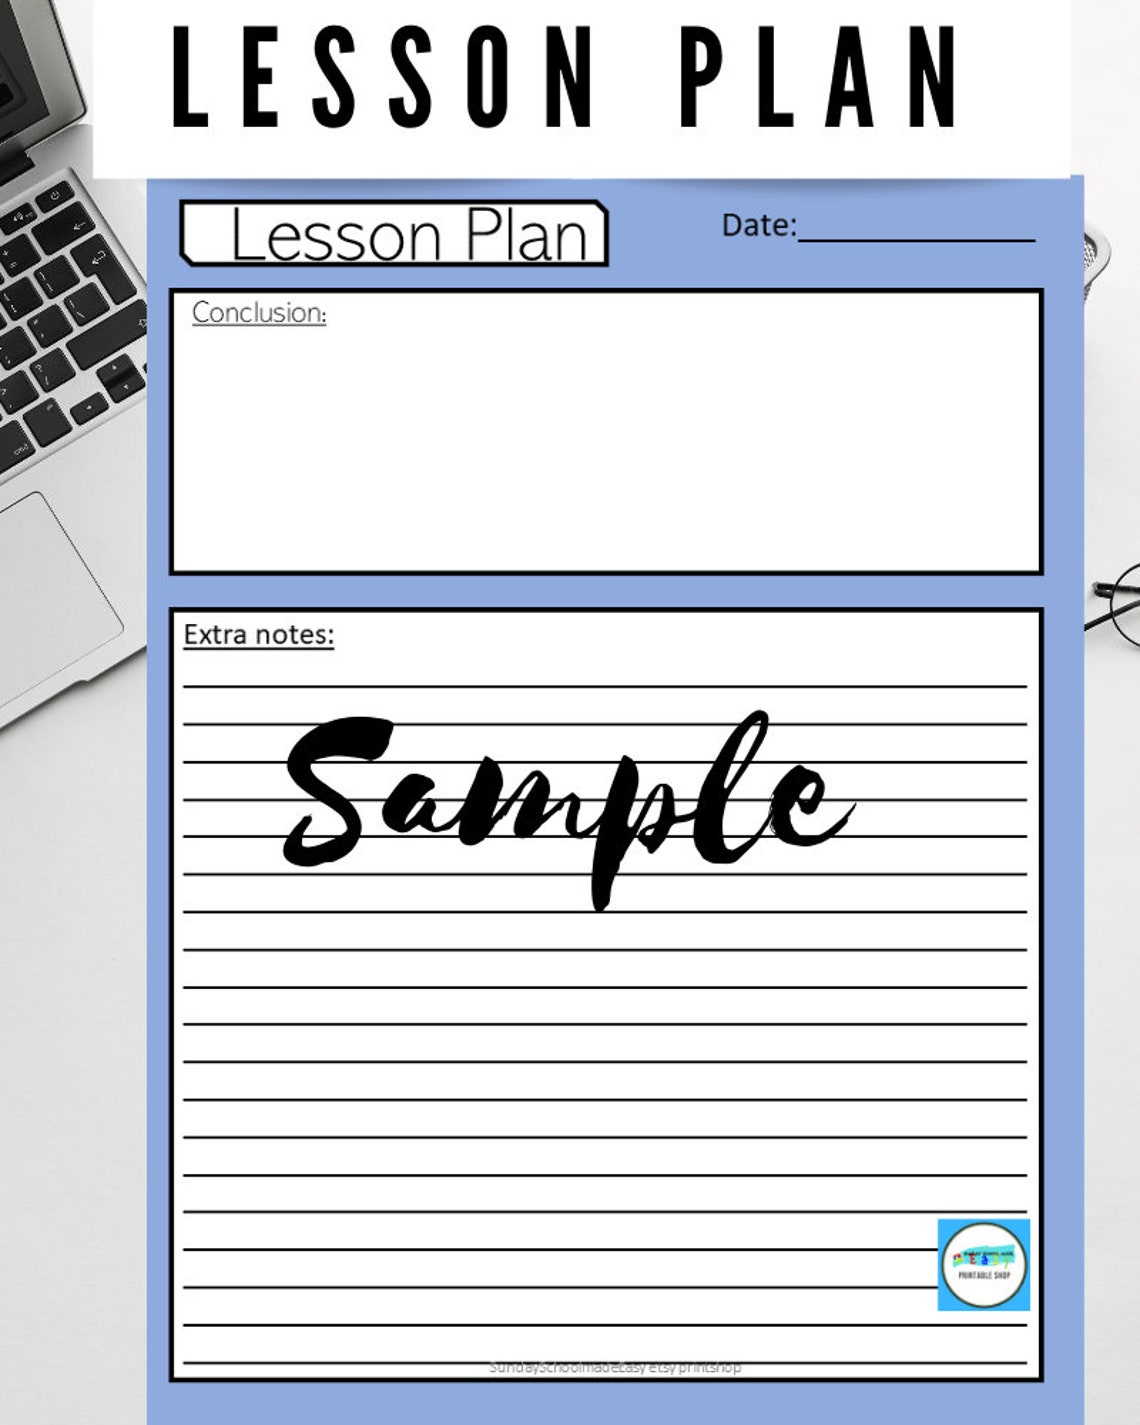 bible-lesson-plan-template-lesson-plan-template-sunday-etsy-rezfoods